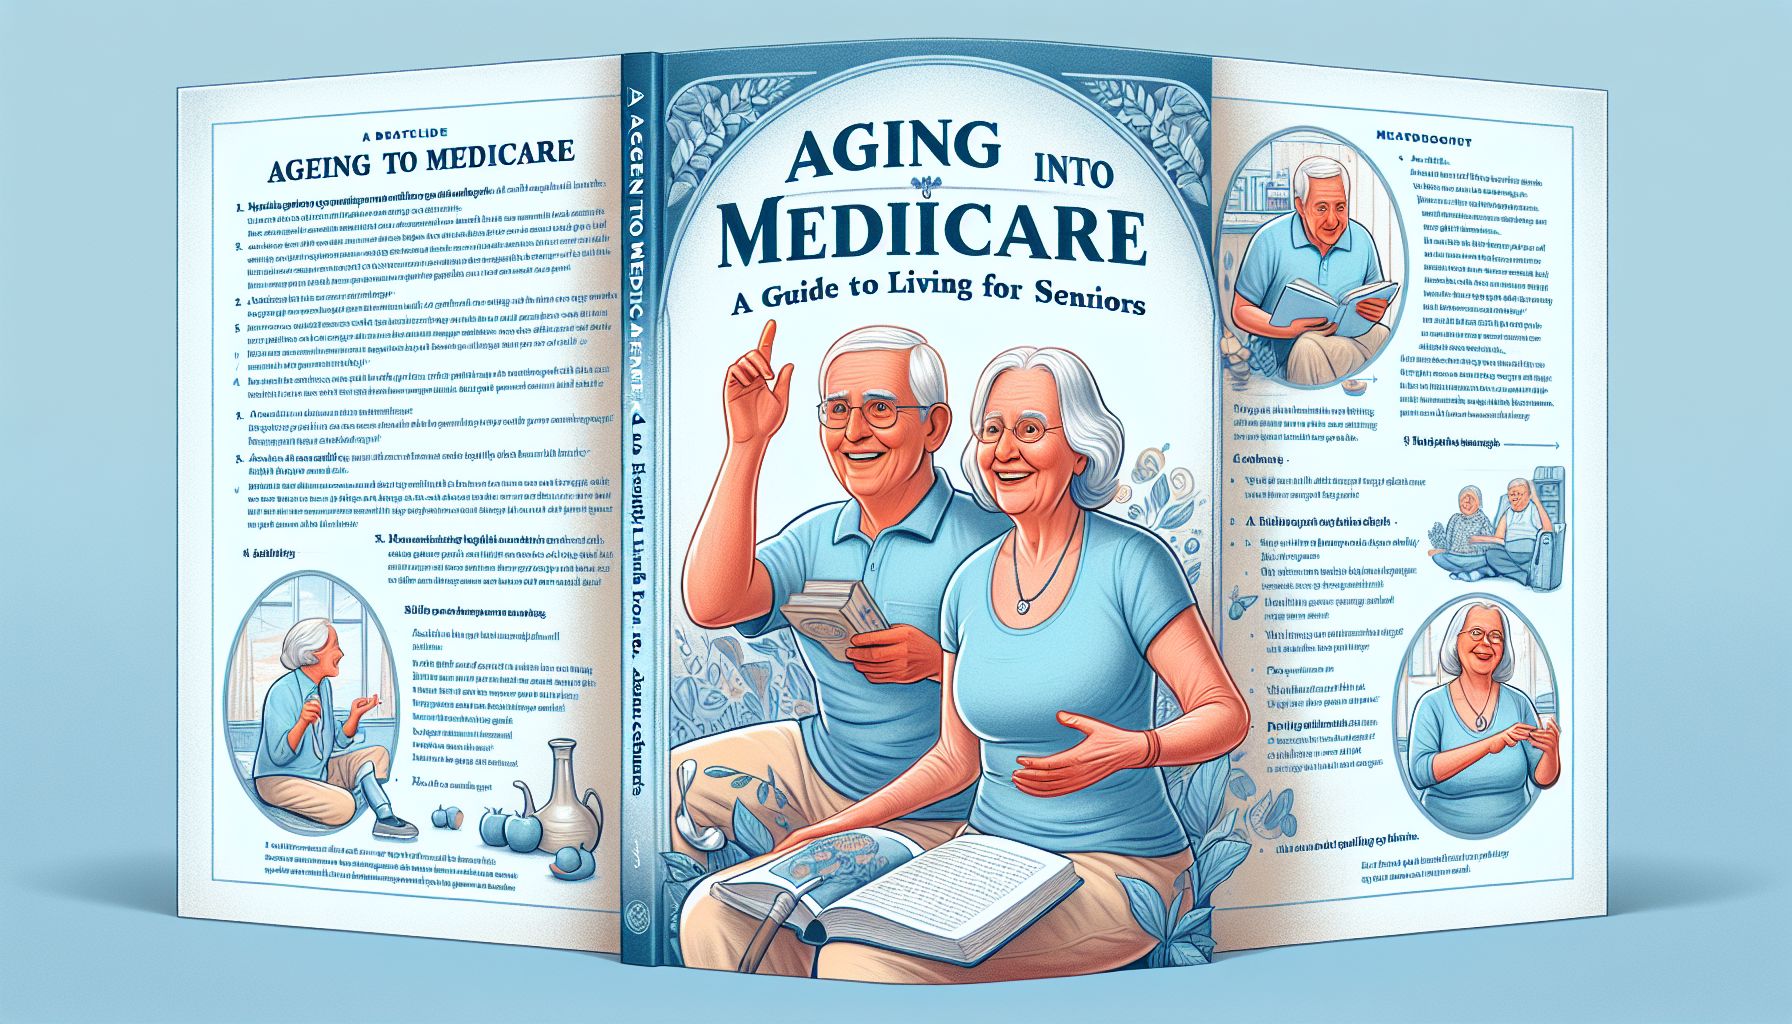 Ageing into Medicare: A Guide to Healthy Living for Seniors